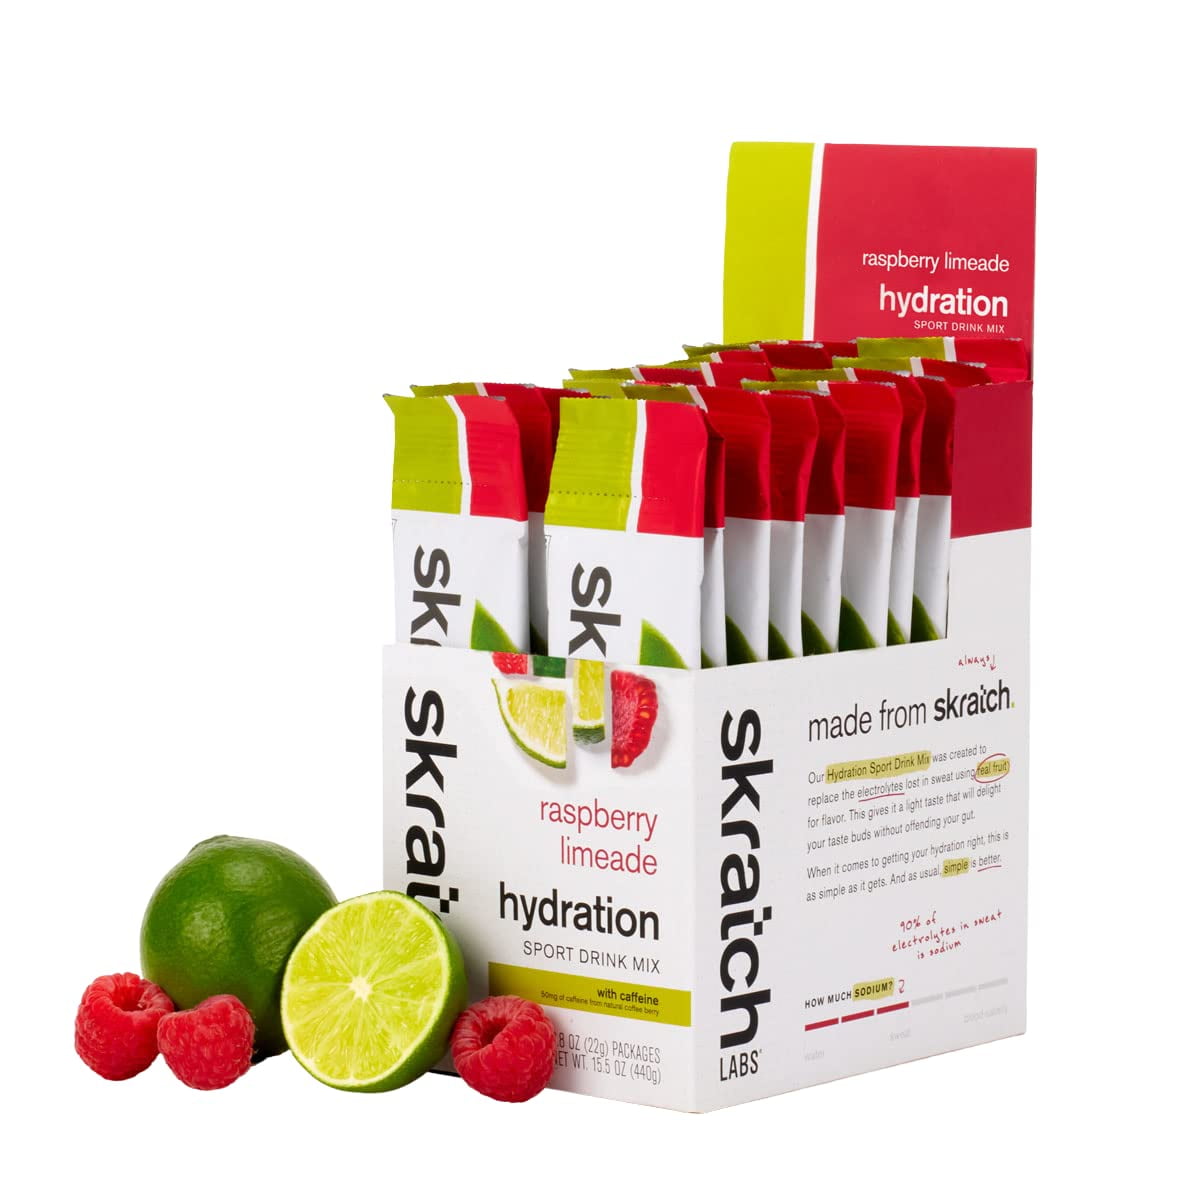 Skratch Labs Drink Mix Sport Hydration Oranges 15.5 Ounce